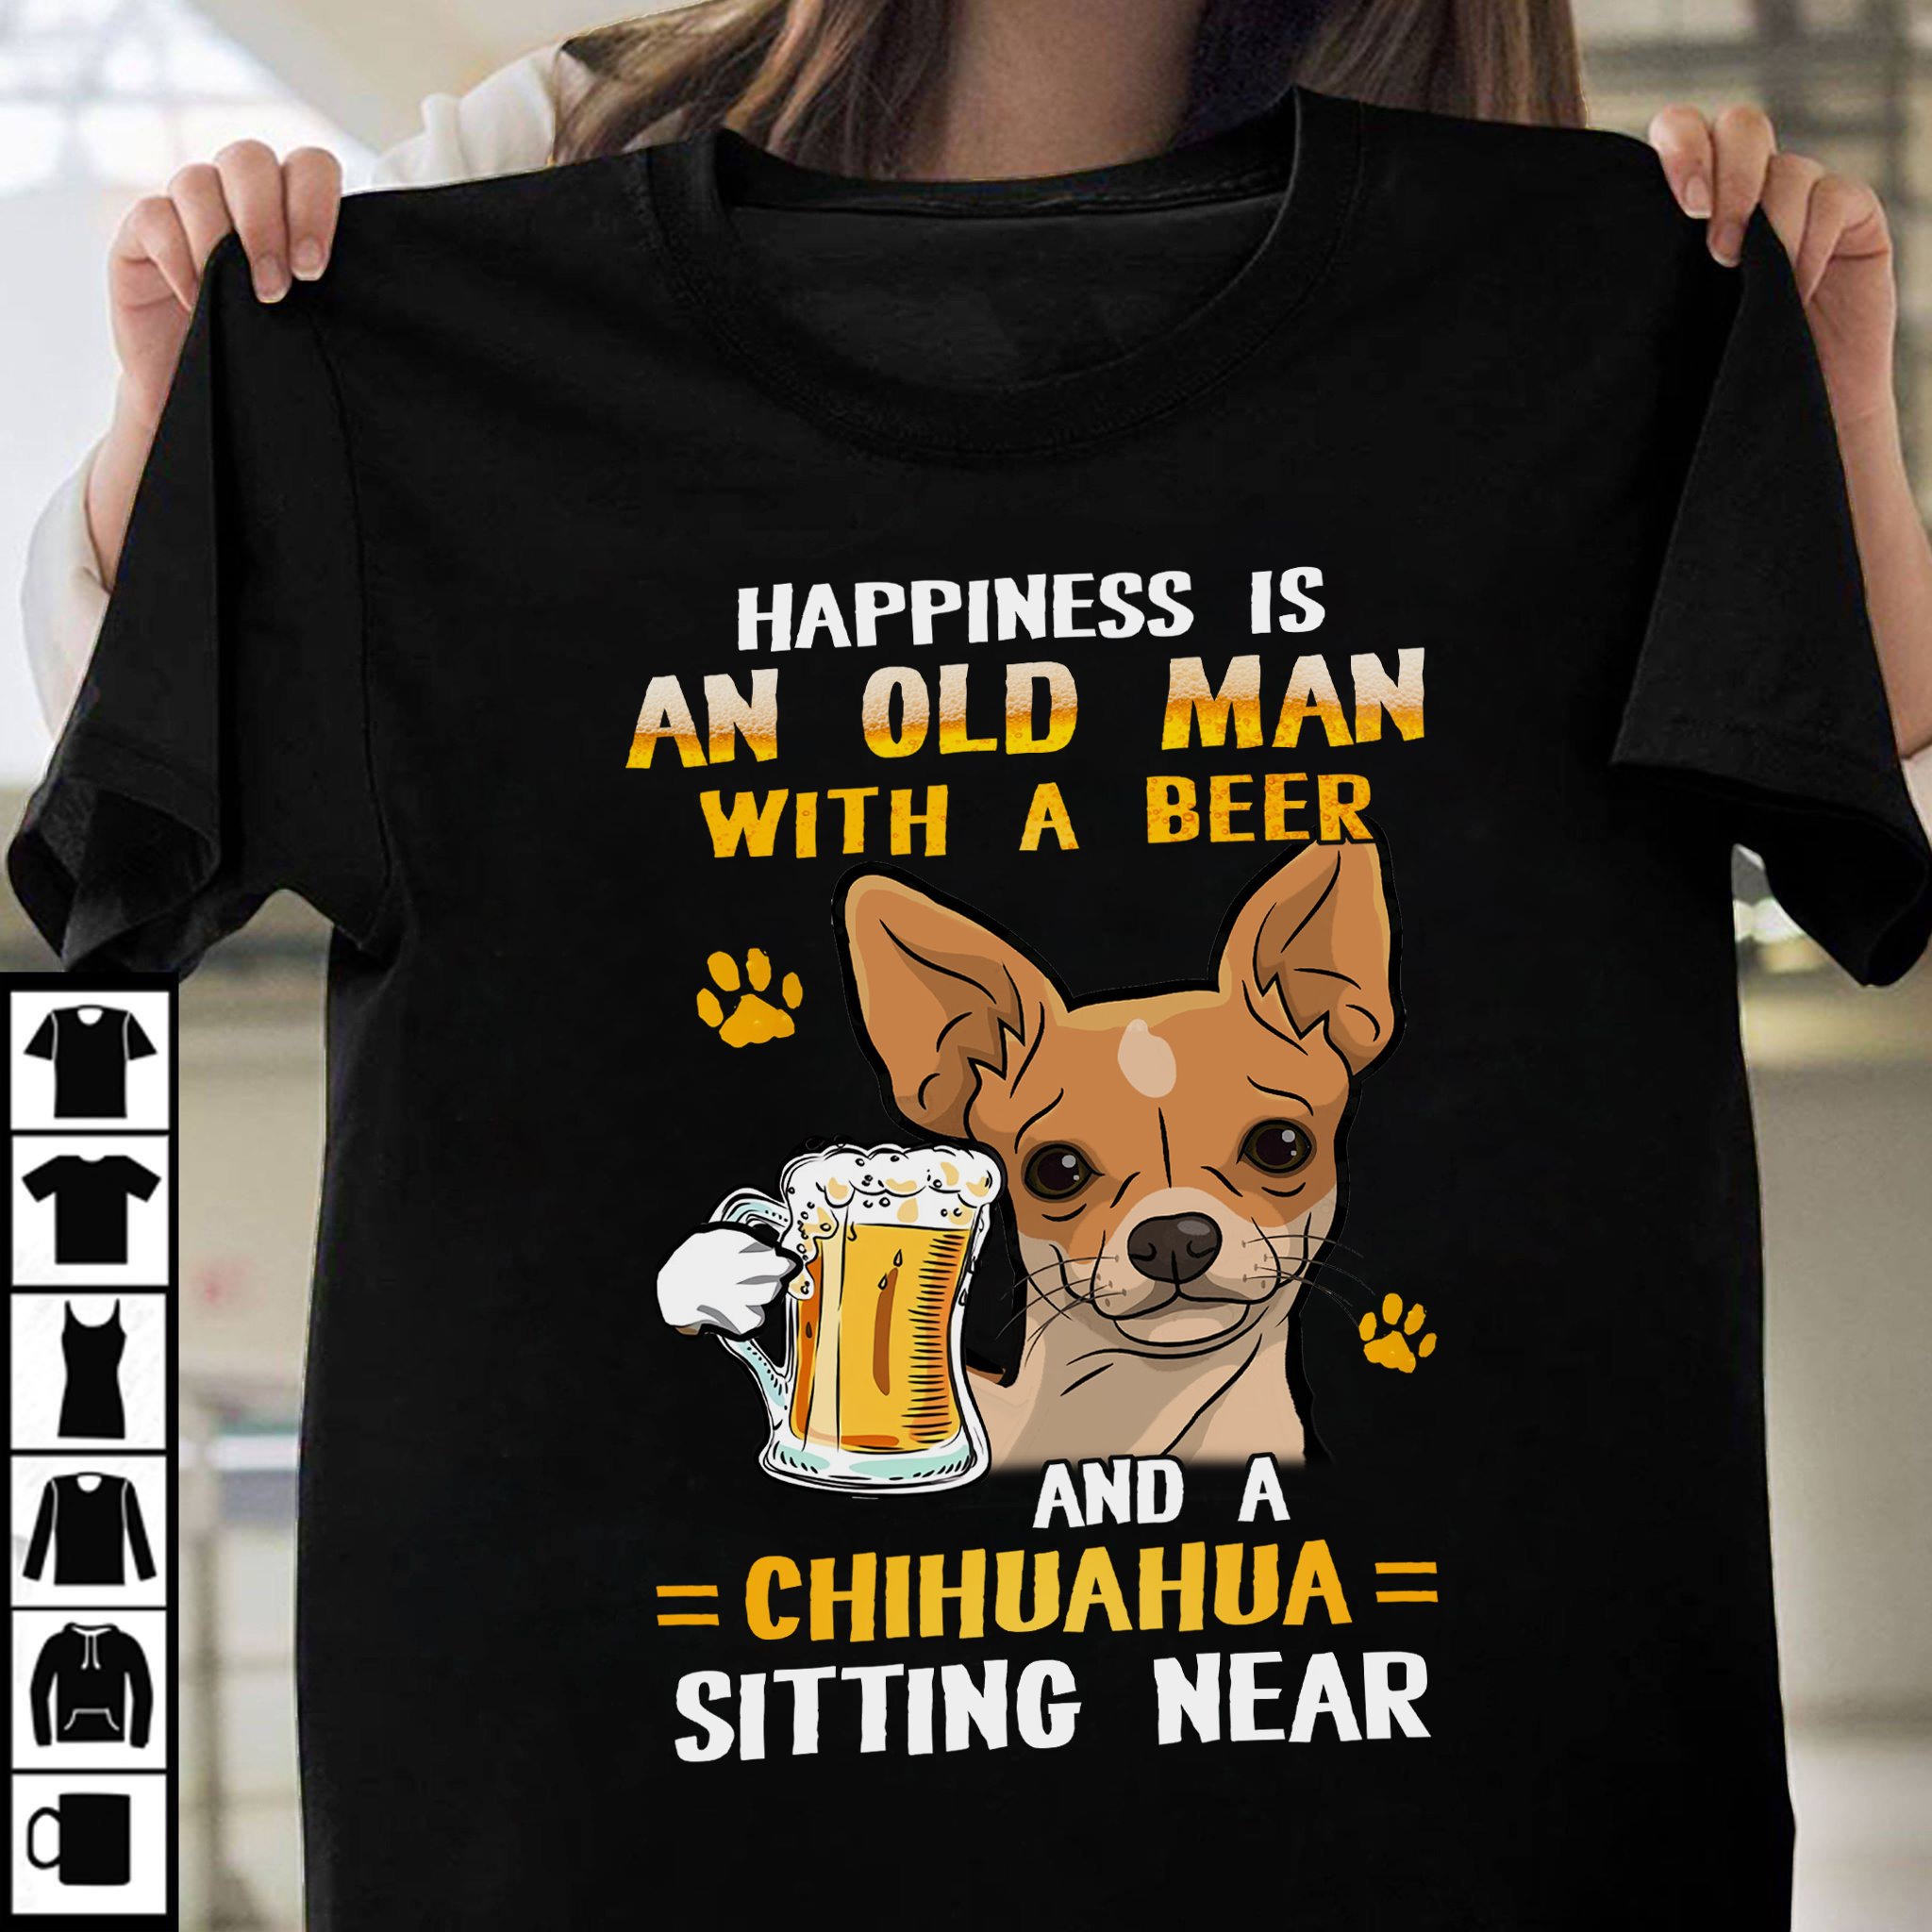 Chihuahua Dog, Beer Lover - Happiness is an old man with a beer and a chihuahua sitting near